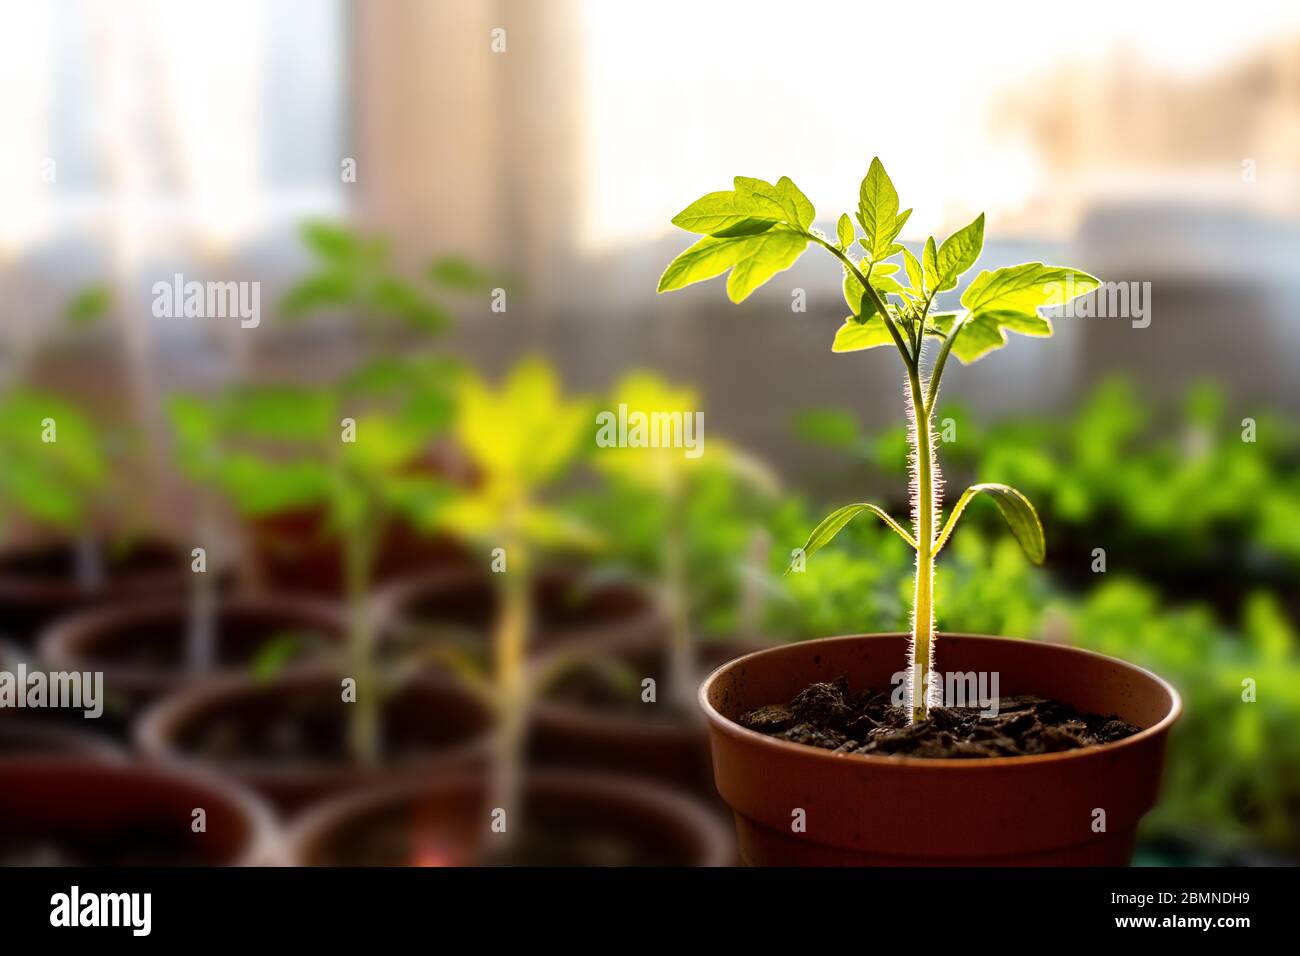 Small sapling plant growing indoor beneath a towards warm sunlight, with more plants in the blurry background Stock Photo - Alamy